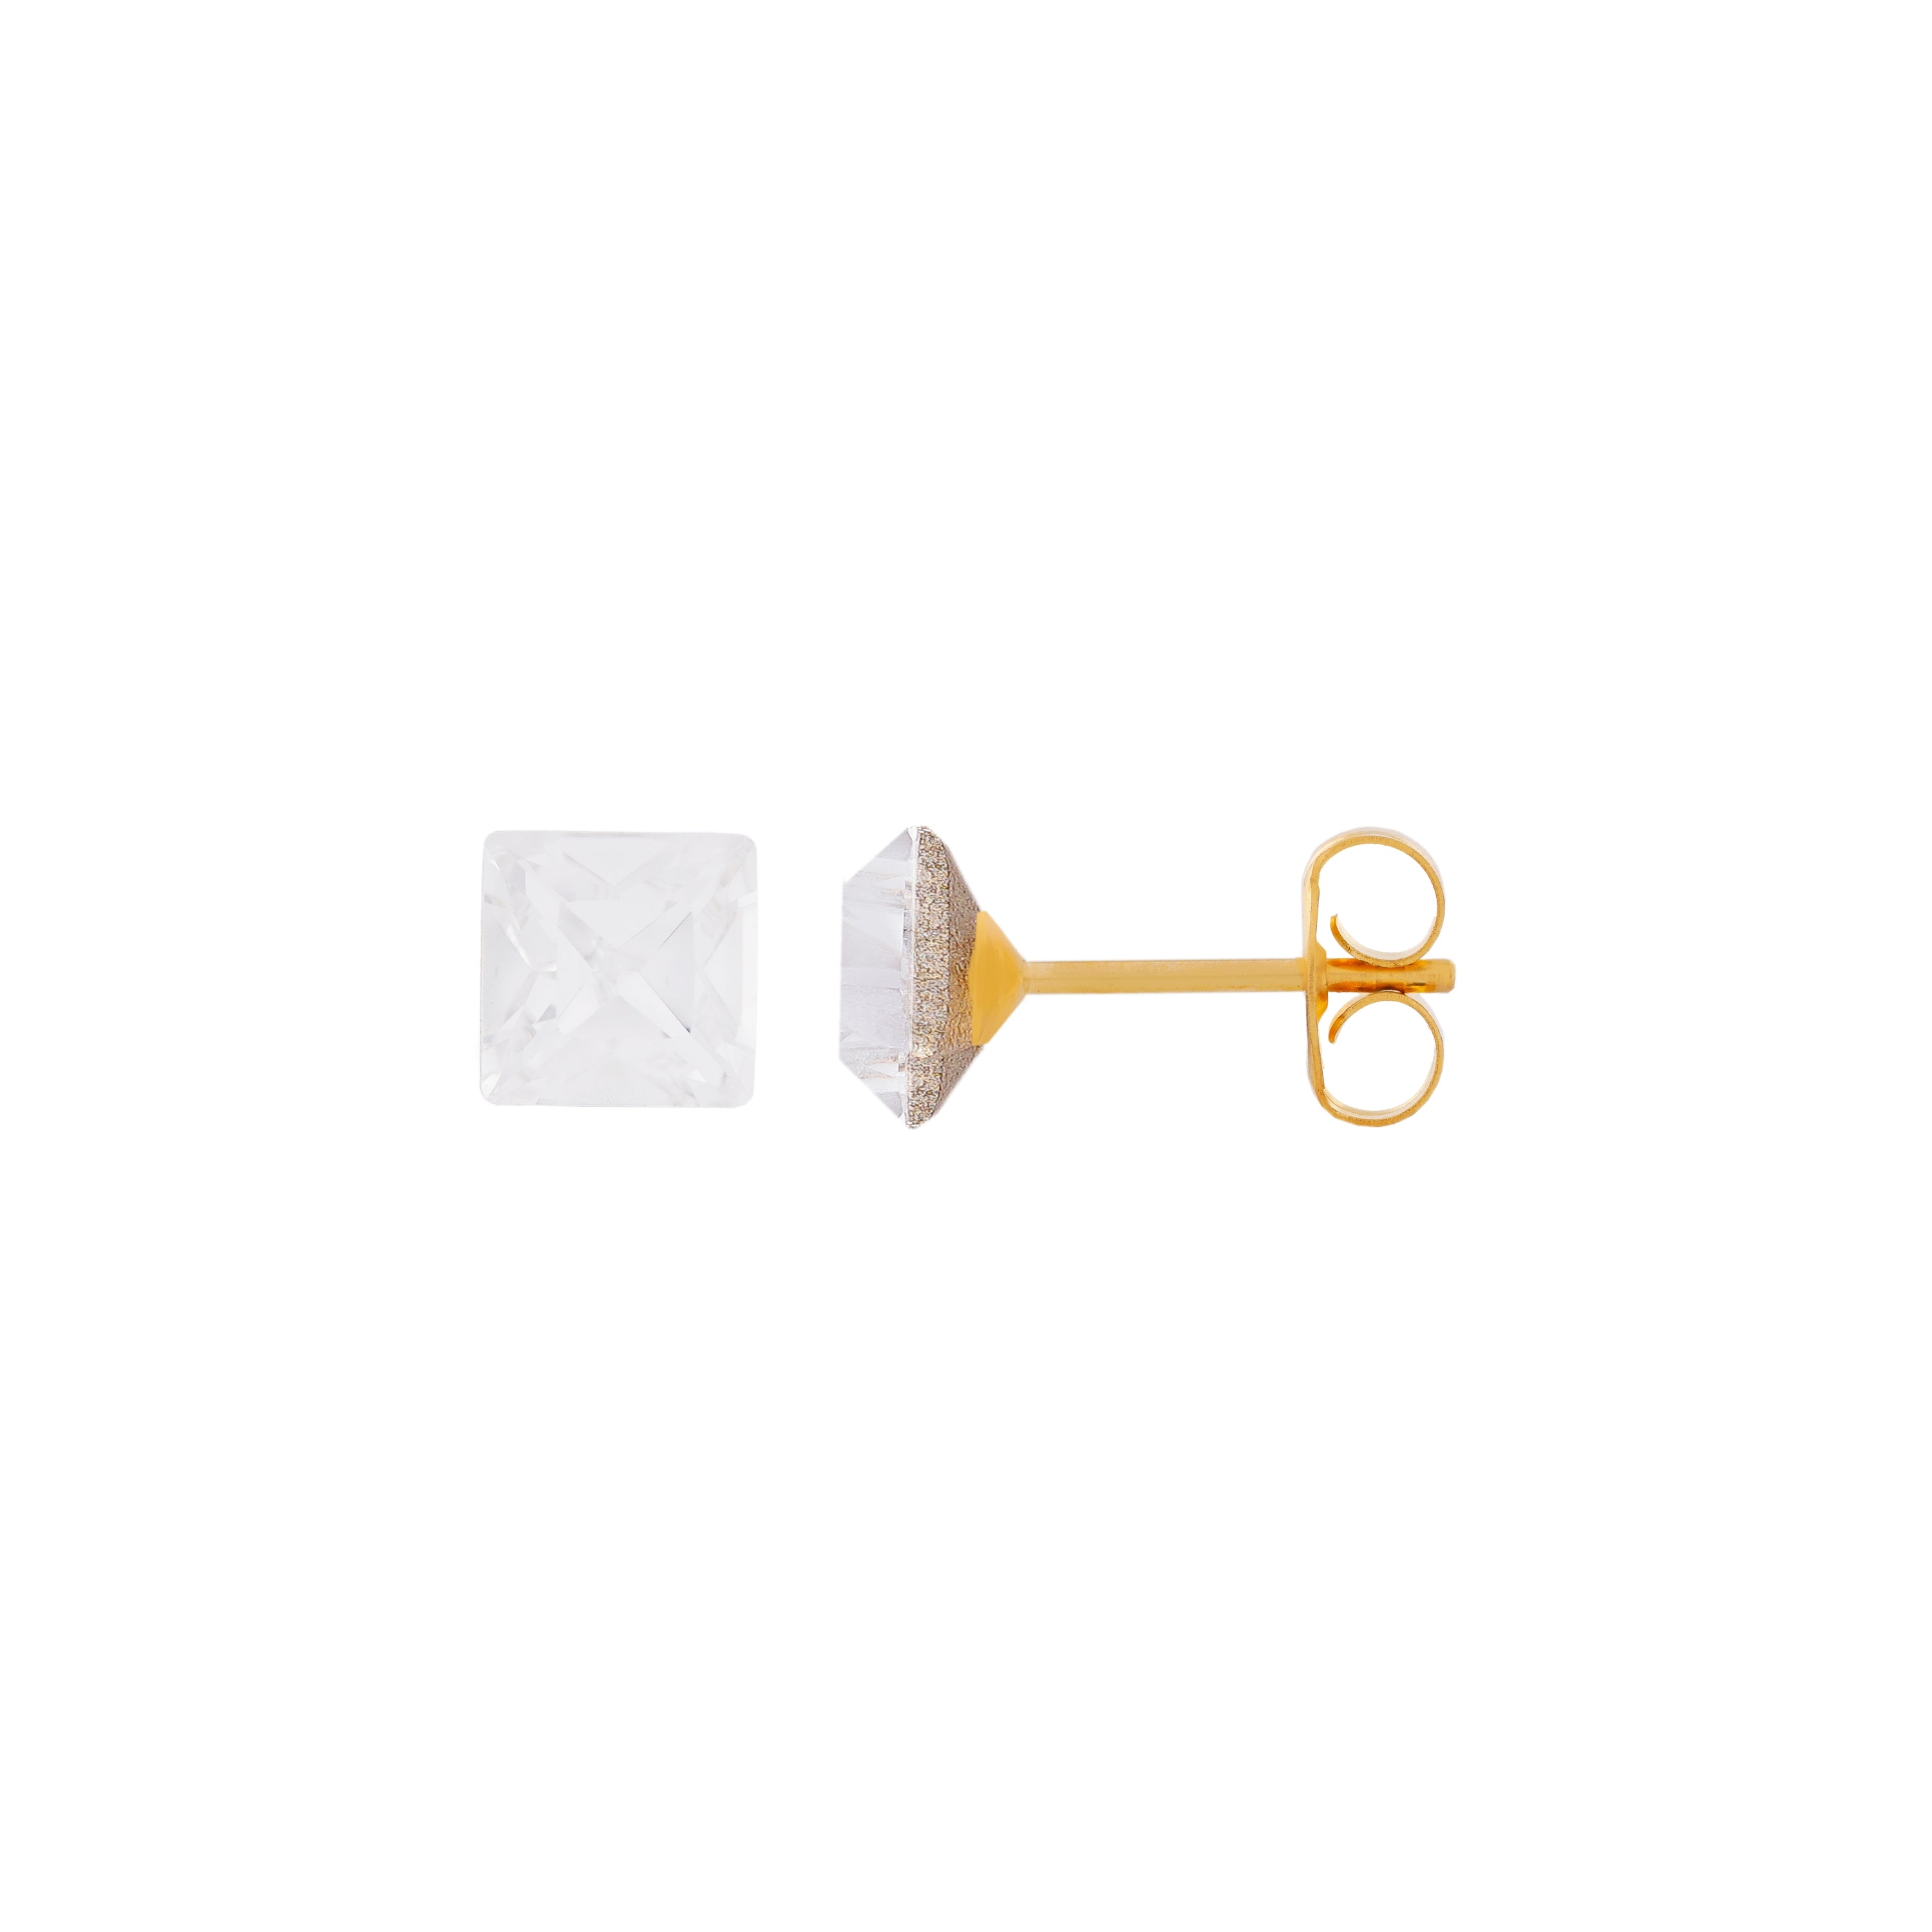 6X6MM Austrian Crystal Square 24K Pure Gold Plated Ear Studs | MADE IN USA | Ideal for everyday wear